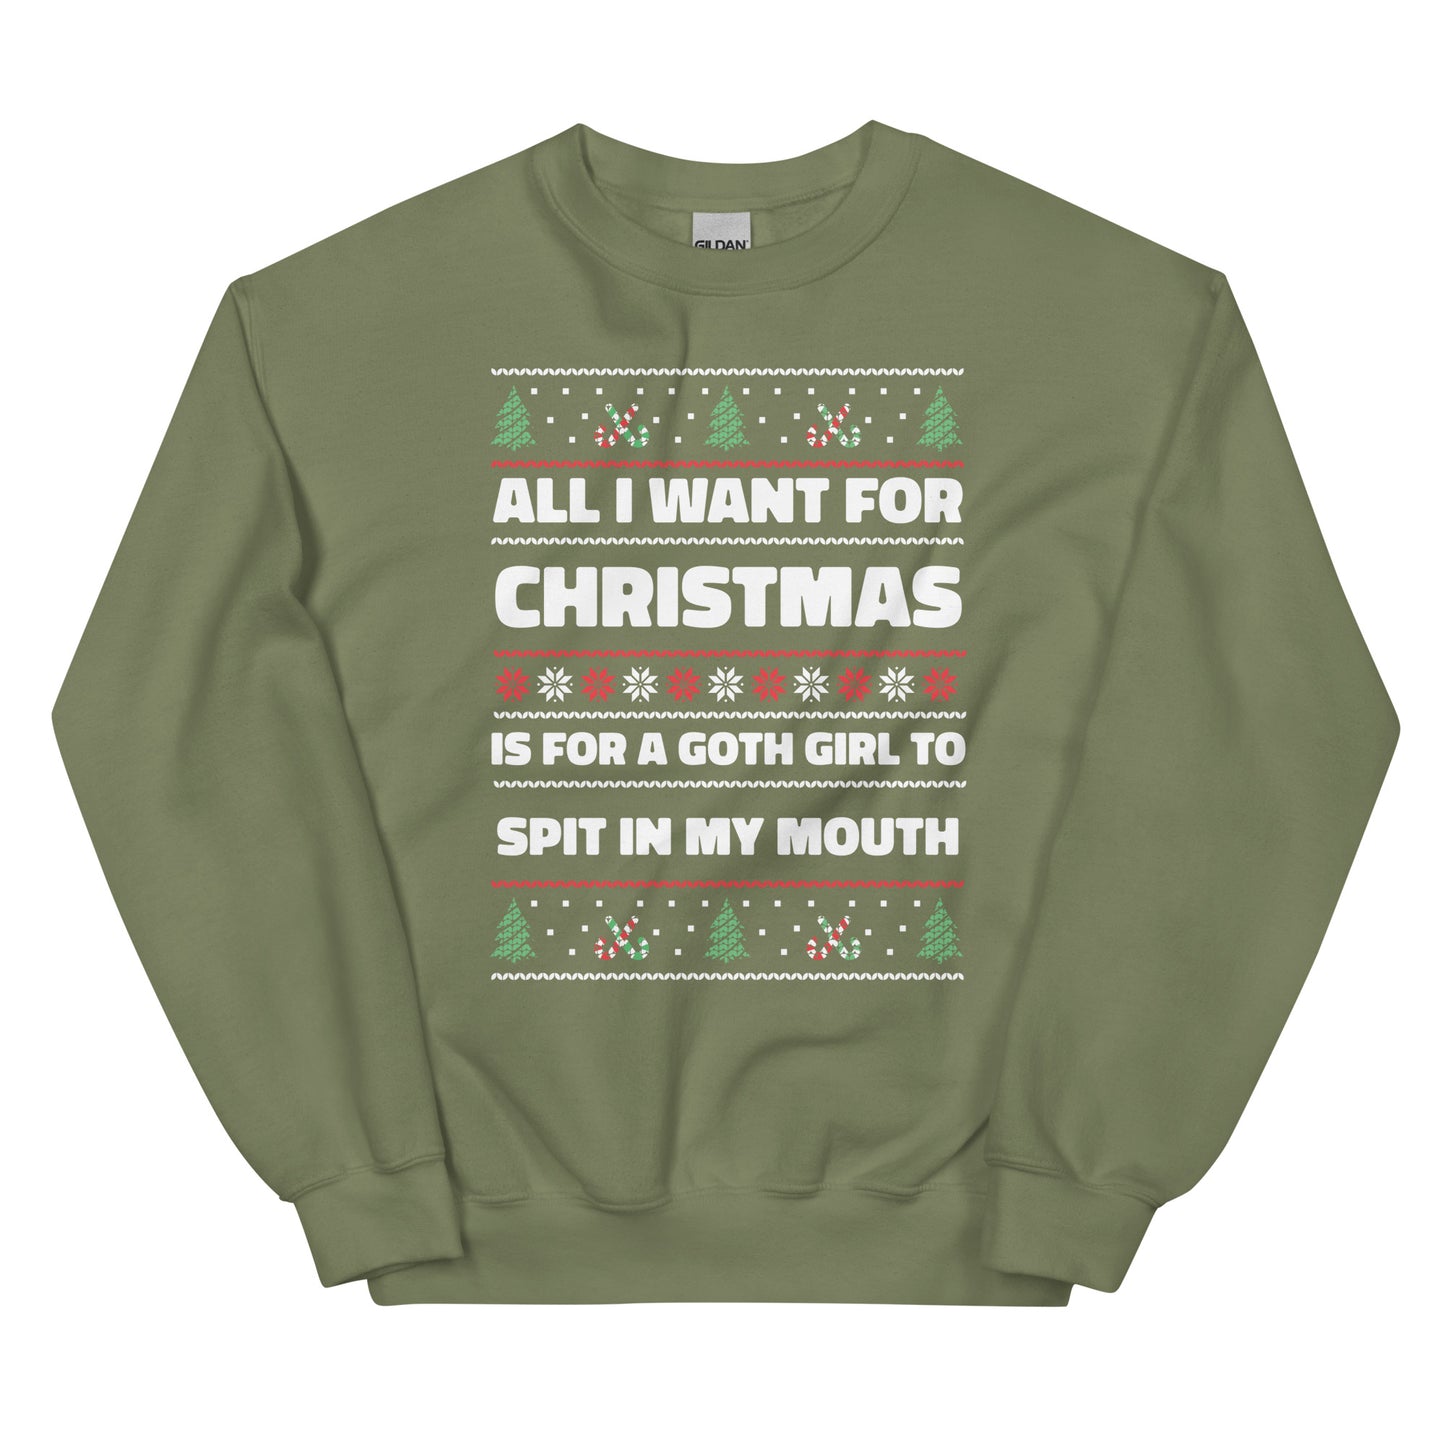 All I Want For Christmas is a Goth Girl Unisex Sweatshirt